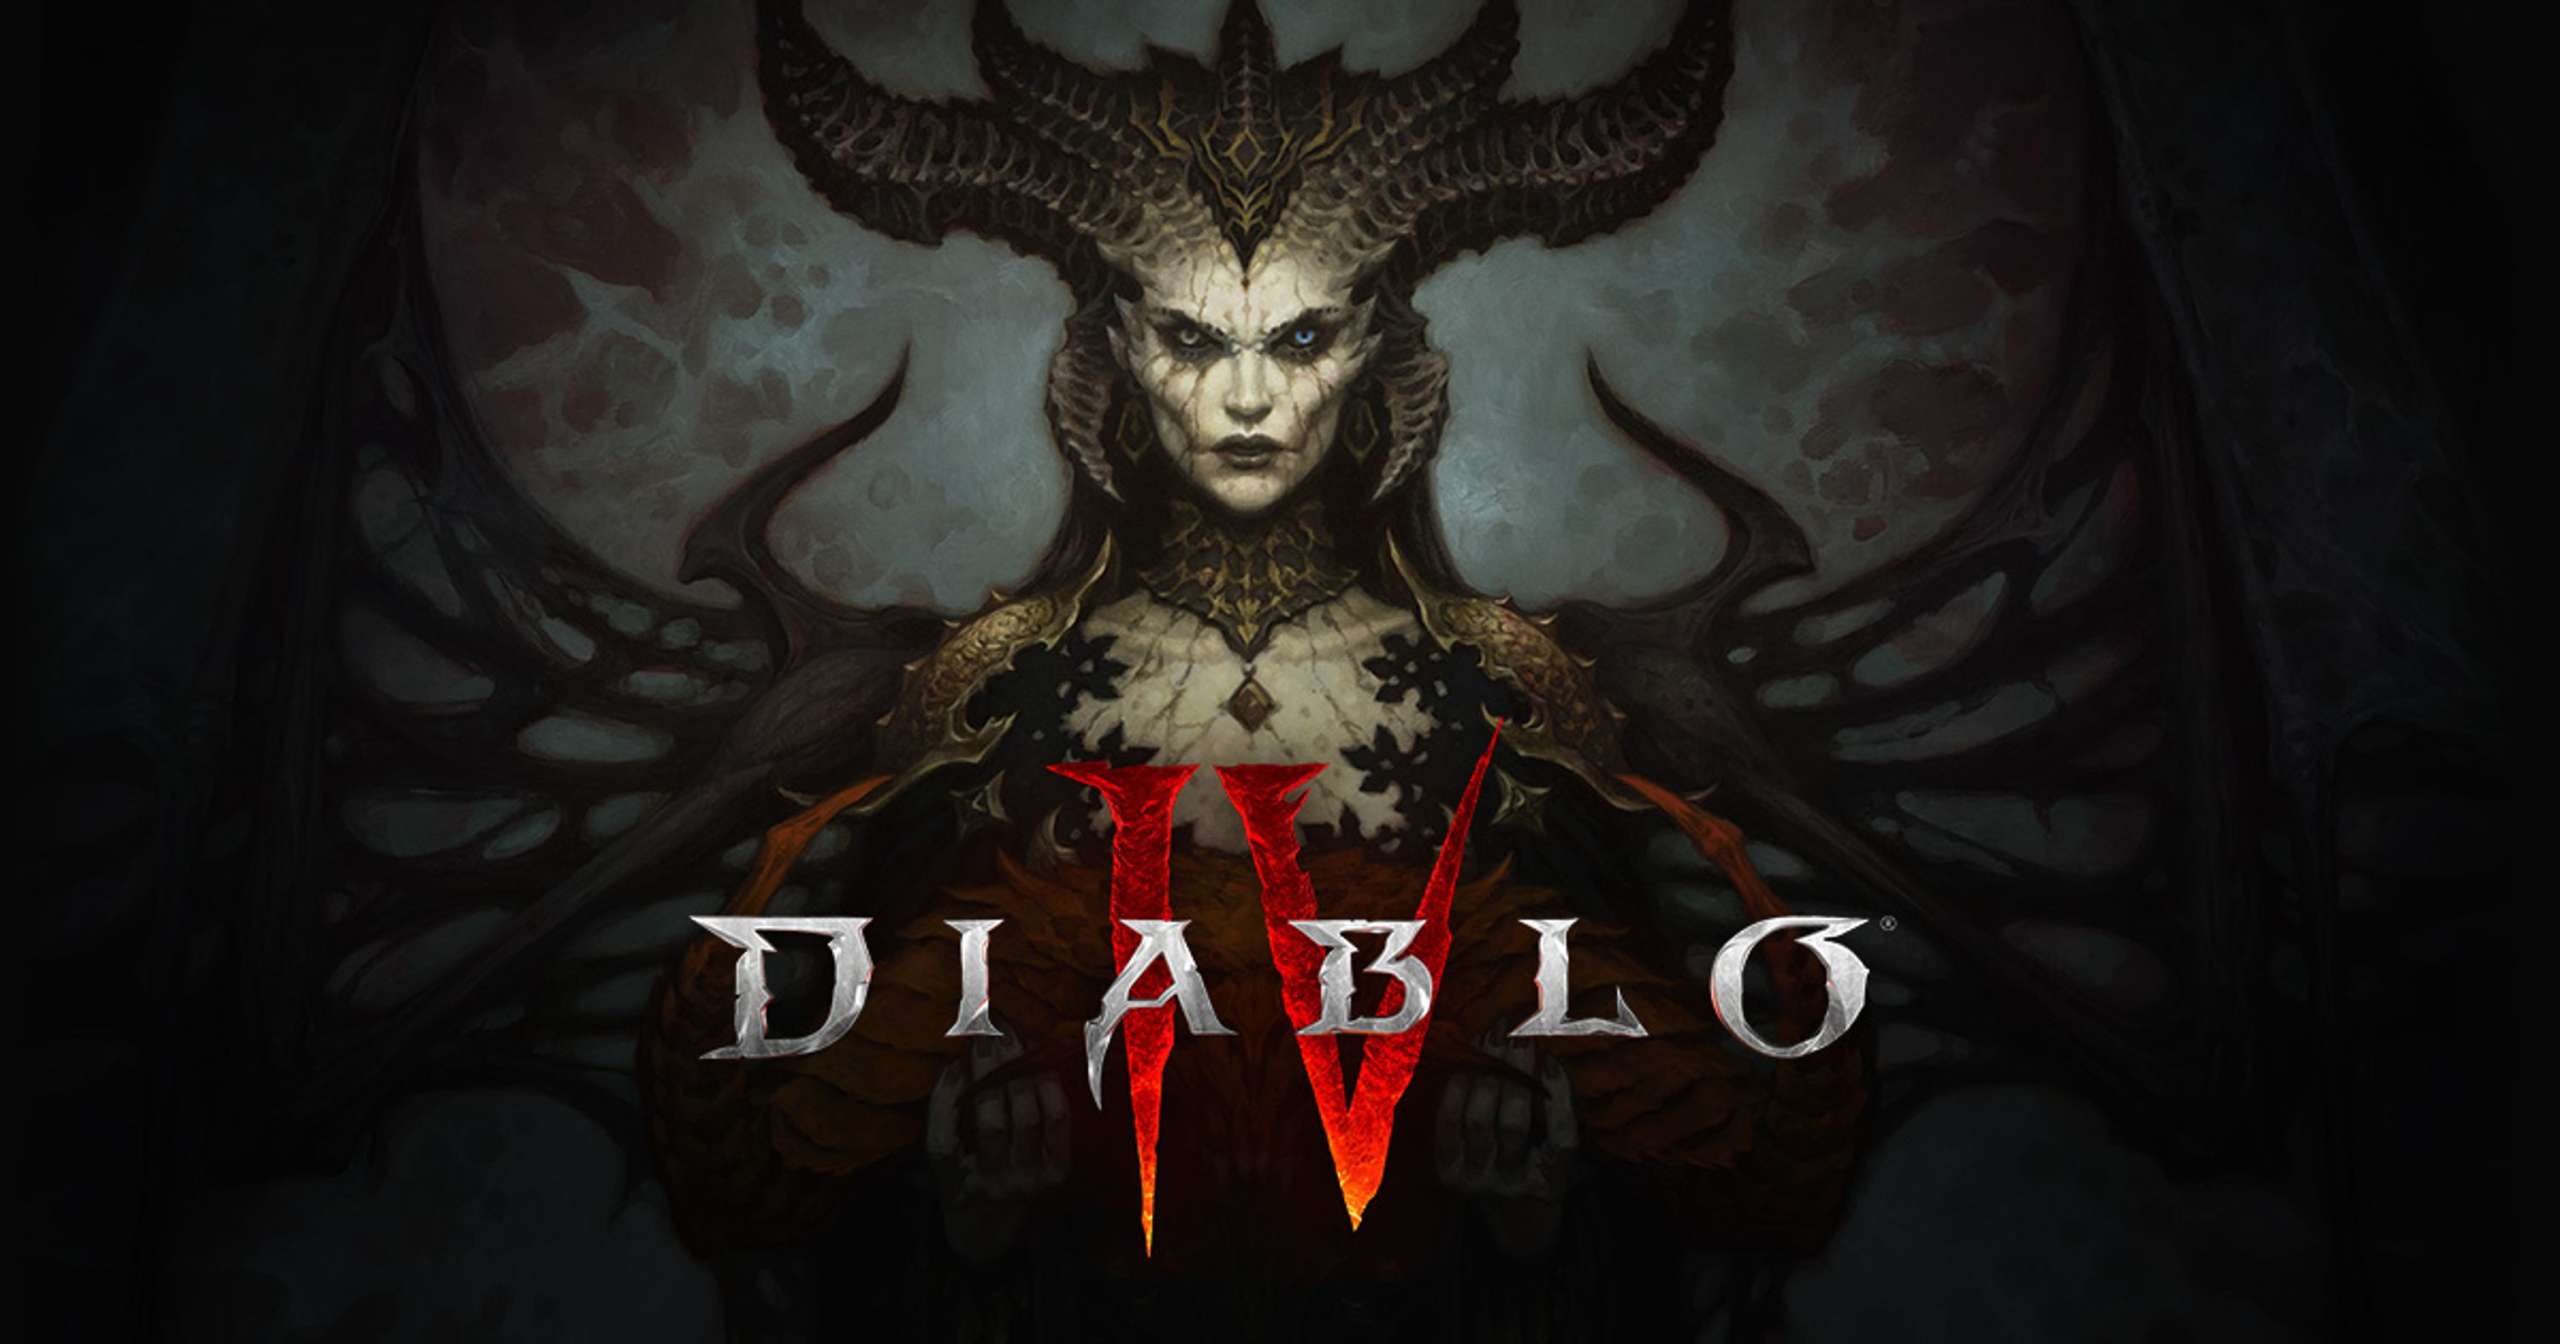 Blizzard Offers To Get A Tattoo For Access To The Diablo IV Beta Test